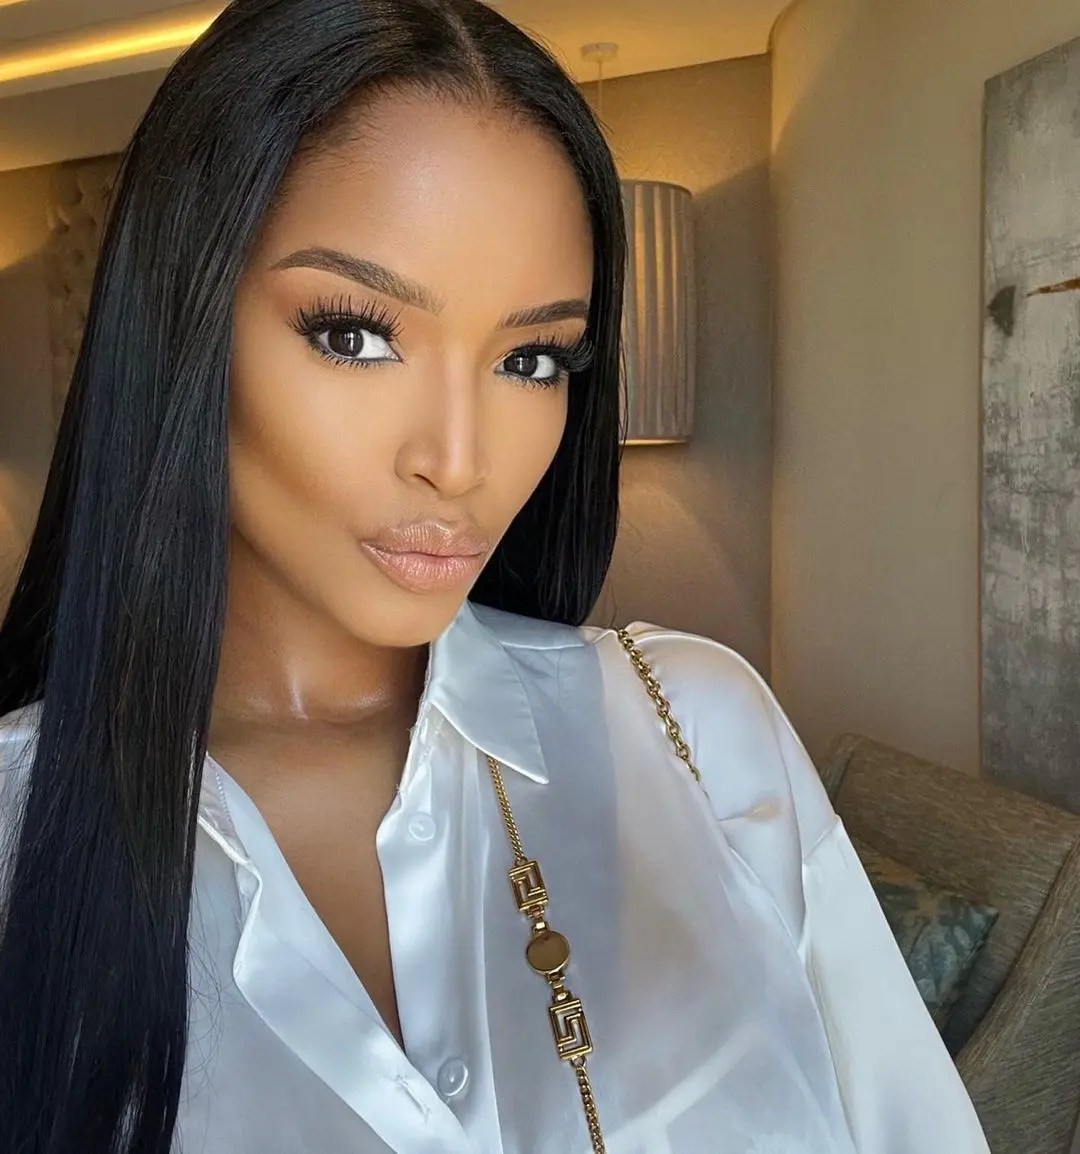 Ayanda Thabethe’s feature on Bona Magazine cover receives mixed reactions